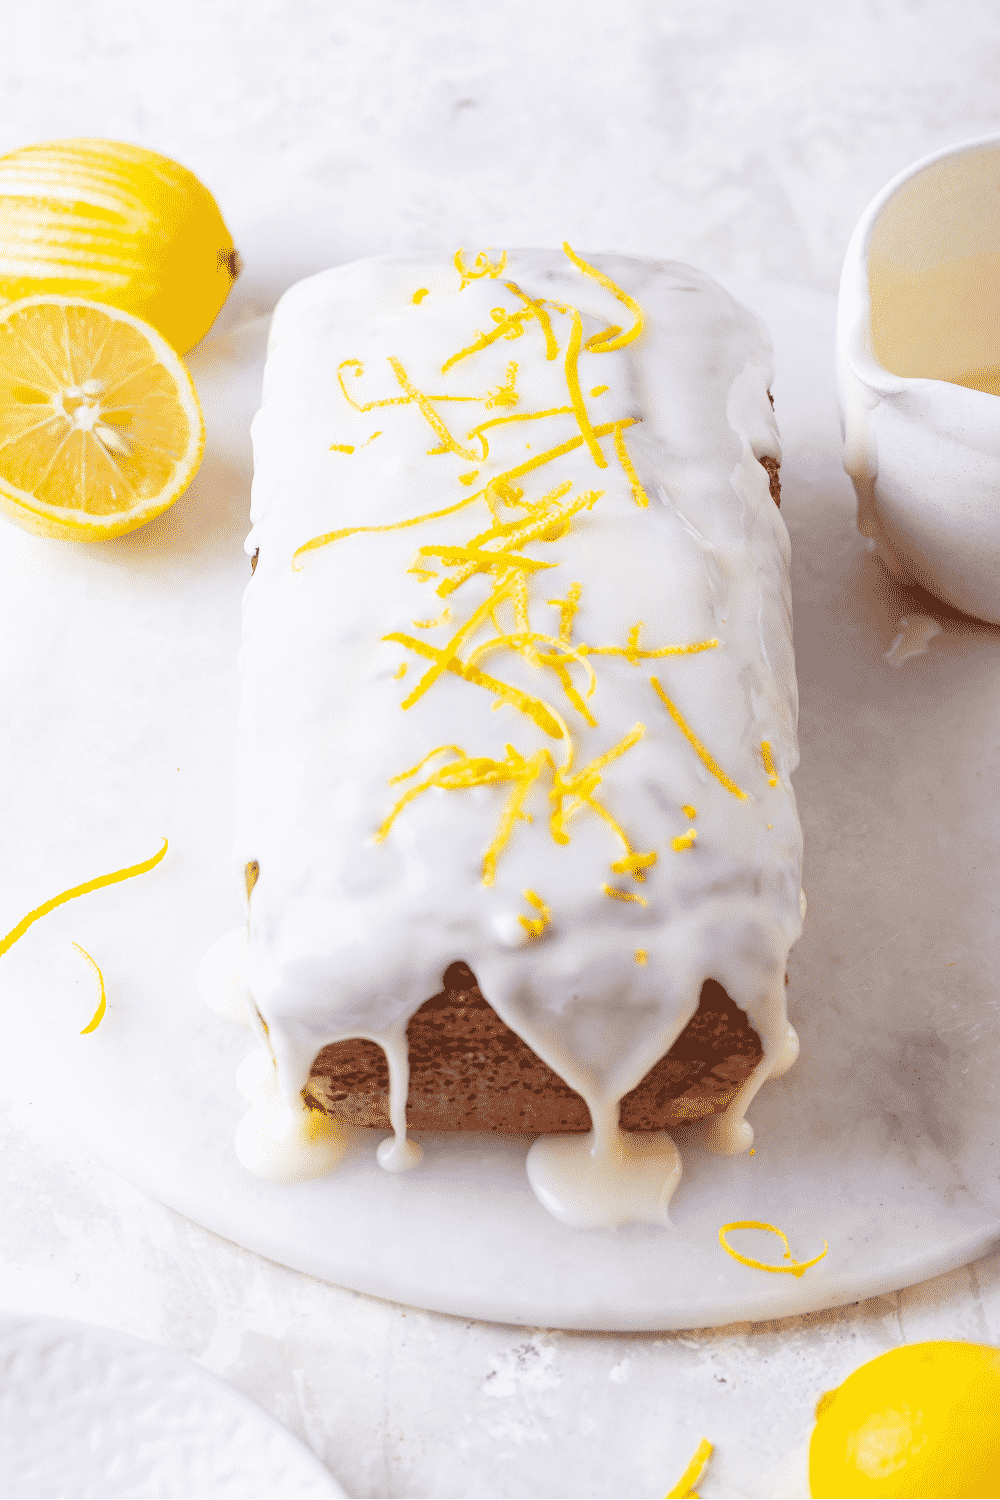 A loaf of keto lemon pound cake on a white saucer. Keto glaze is dripping down the front and side of the cake onto the saucer. A lemon zest is on top of the cake on the keto glaze. There are two lemons to the back left of the cake and a bowl of keto glaze to the right.